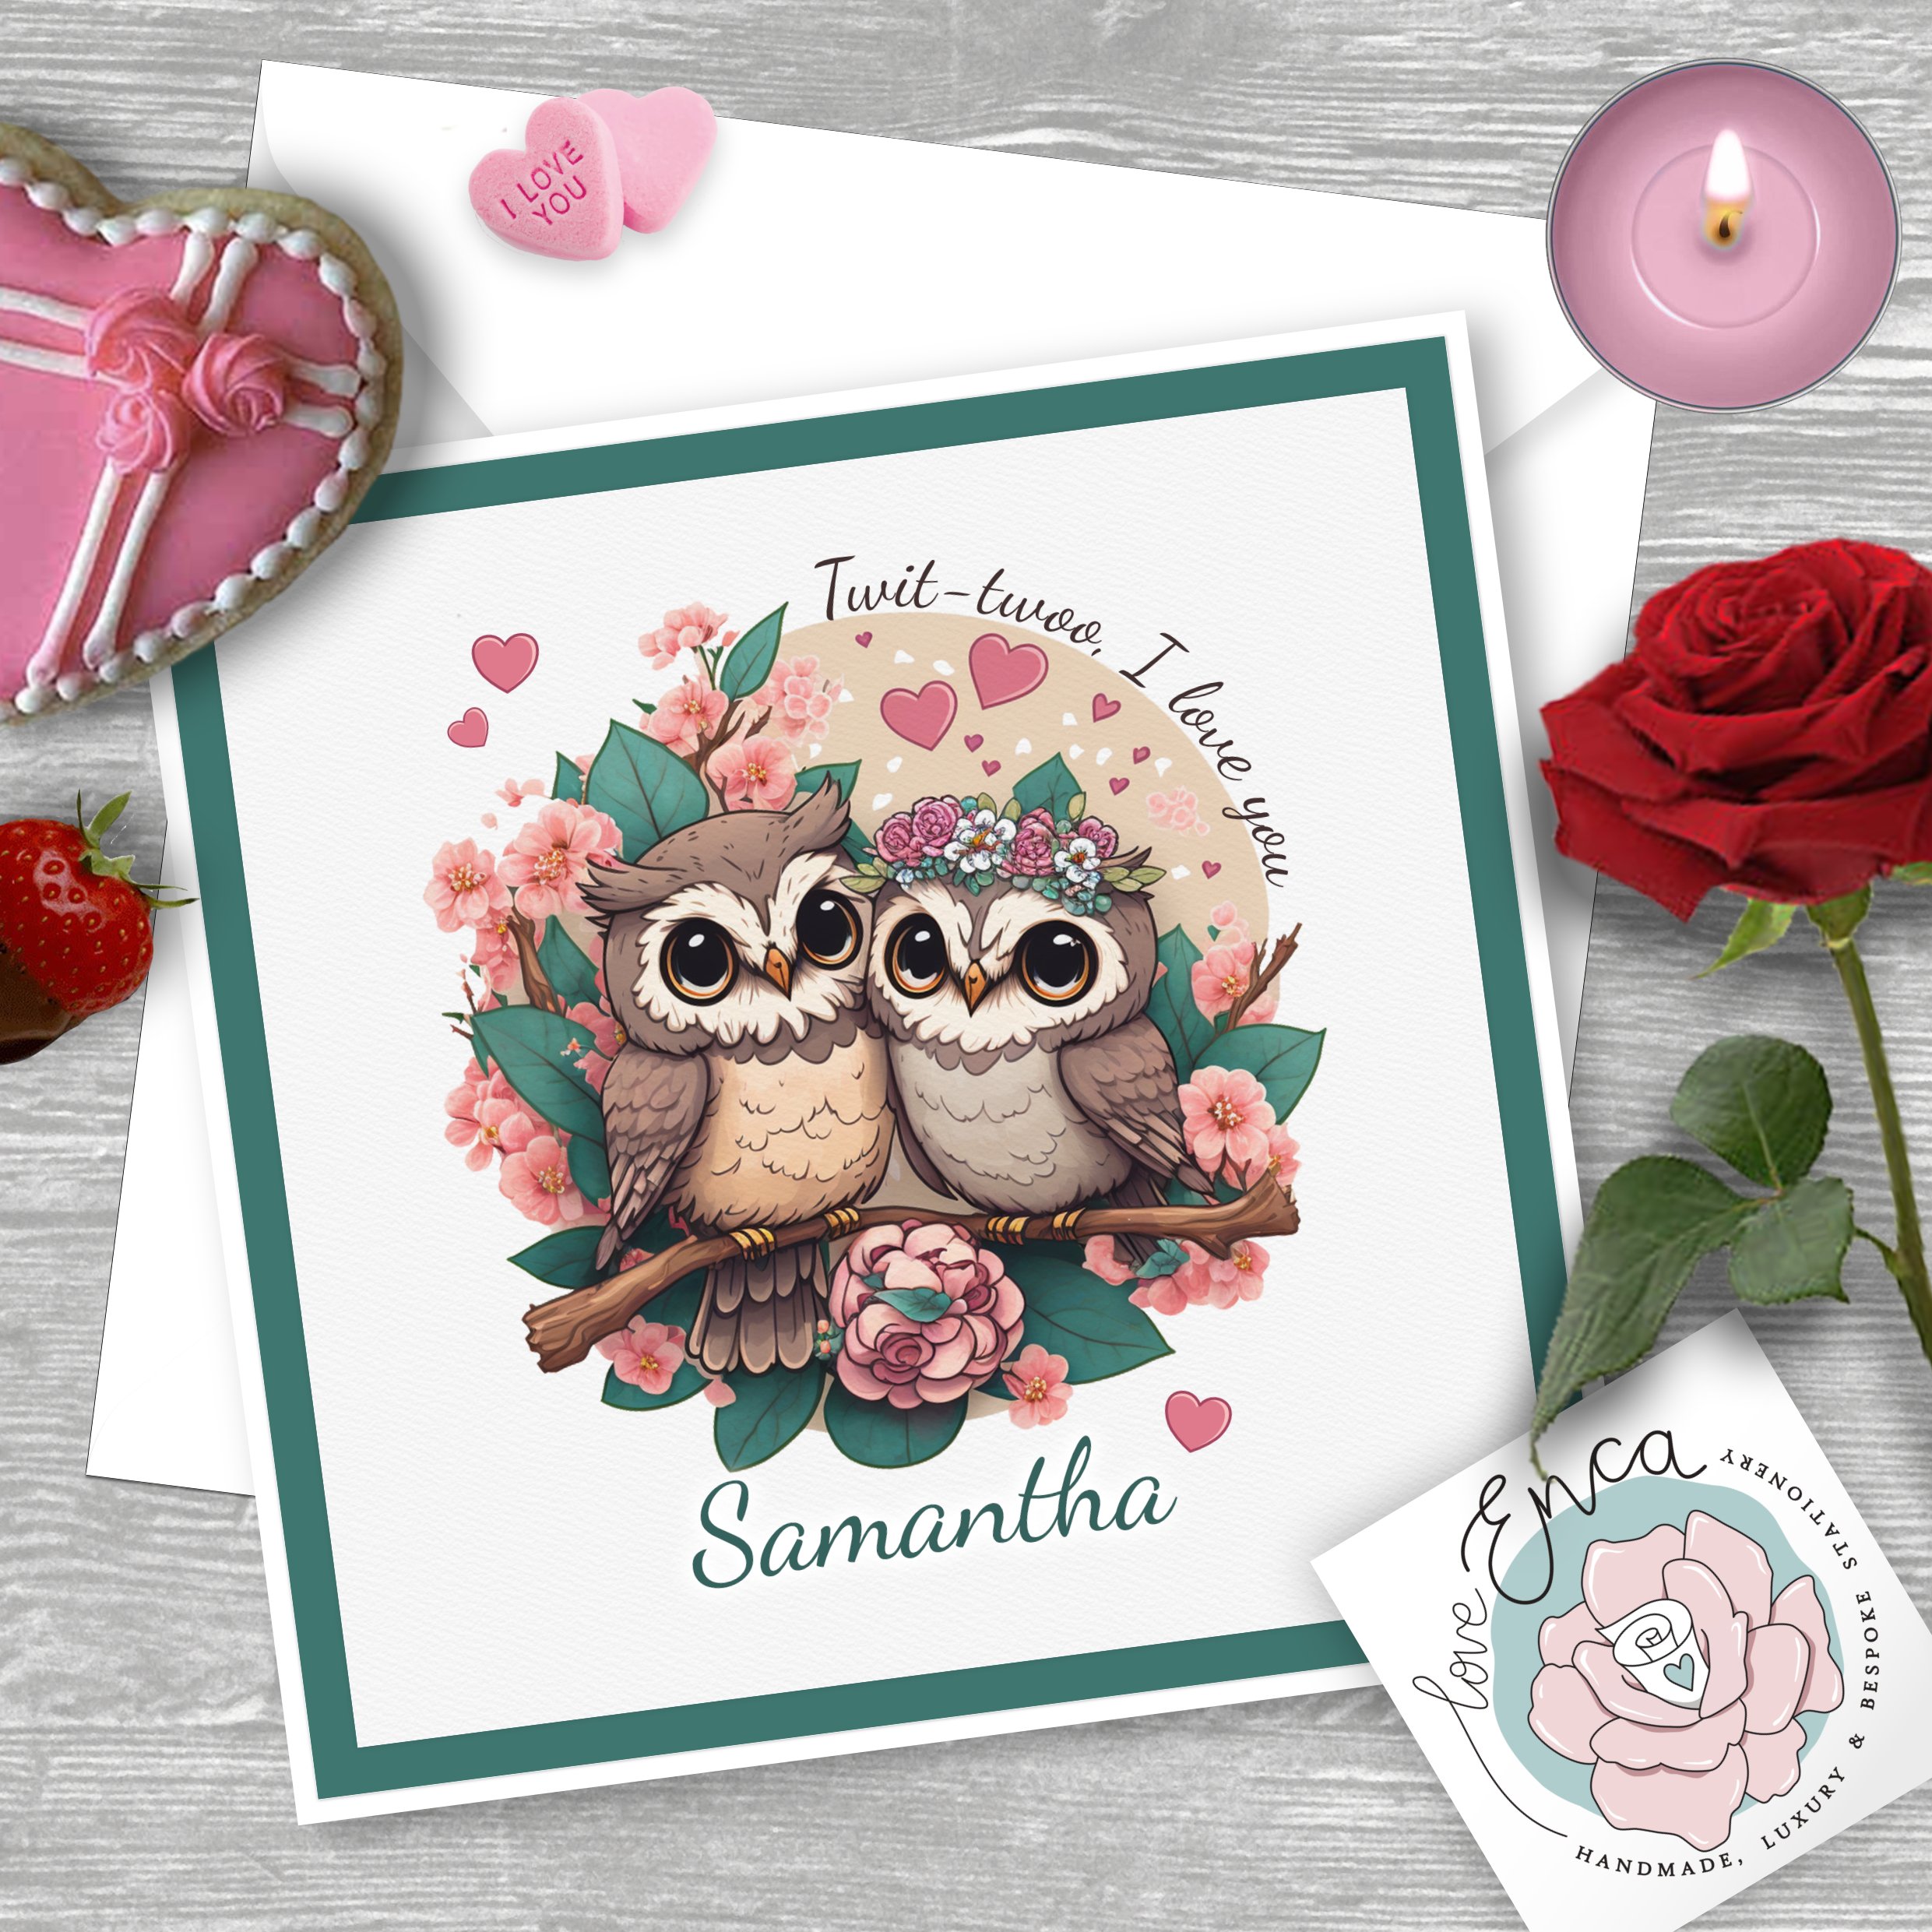 Personalised　Enca　Love　I　Owl　For　Card　Couple　—　Valentine's　Him　Love　For　Her　Twit-twoo　You